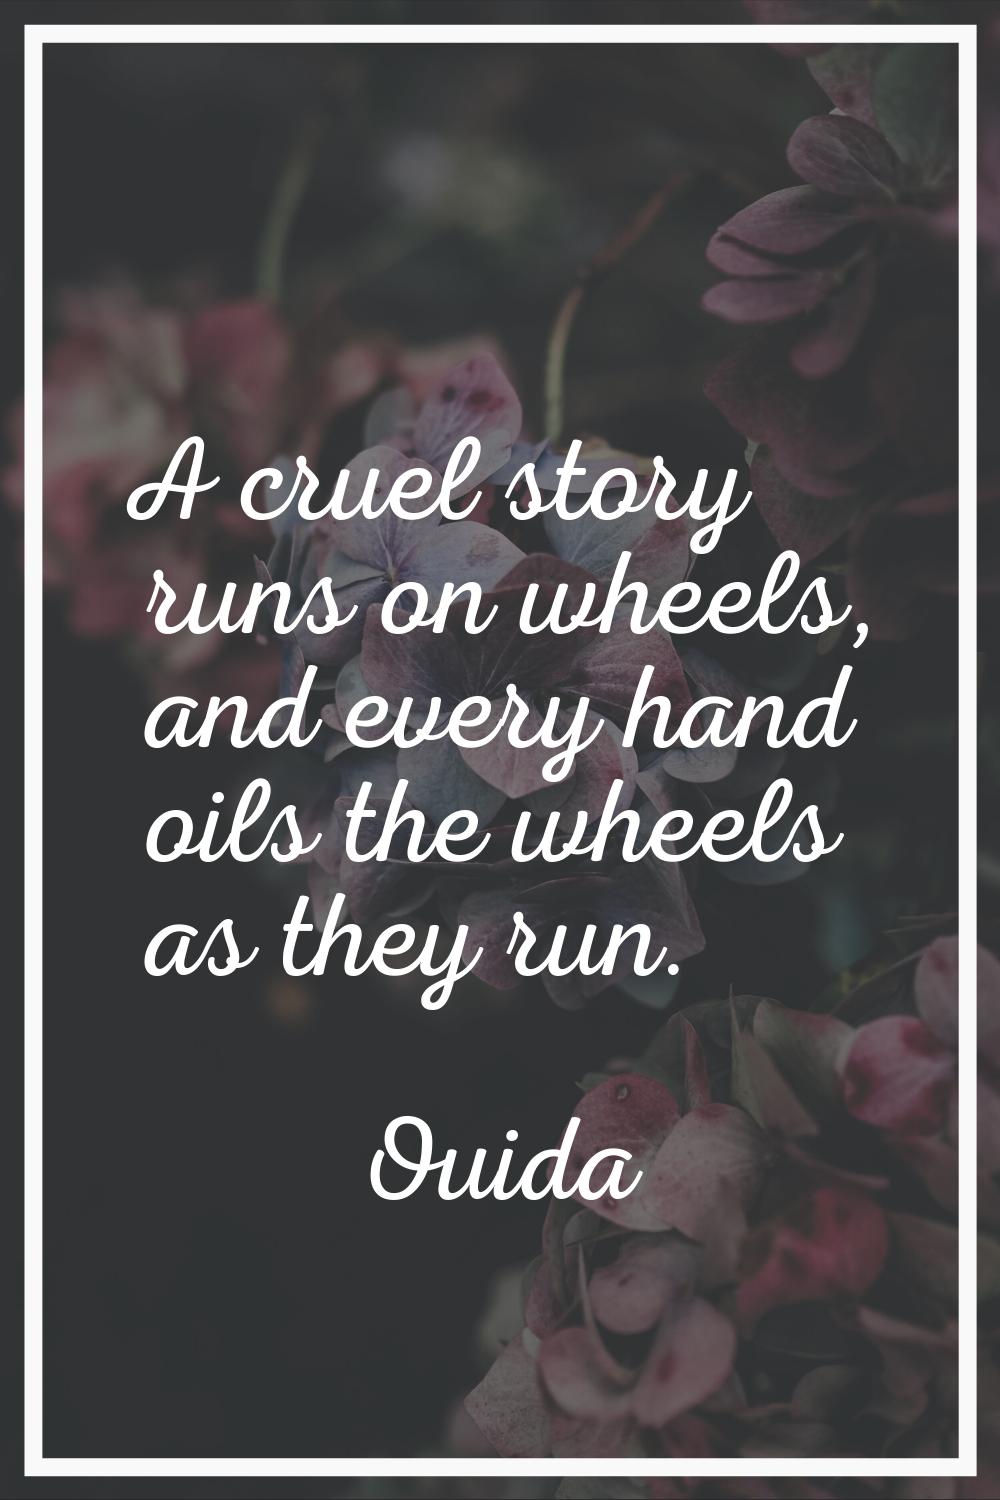 A cruel story runs on wheels, and every hand oils the wheels as they run.